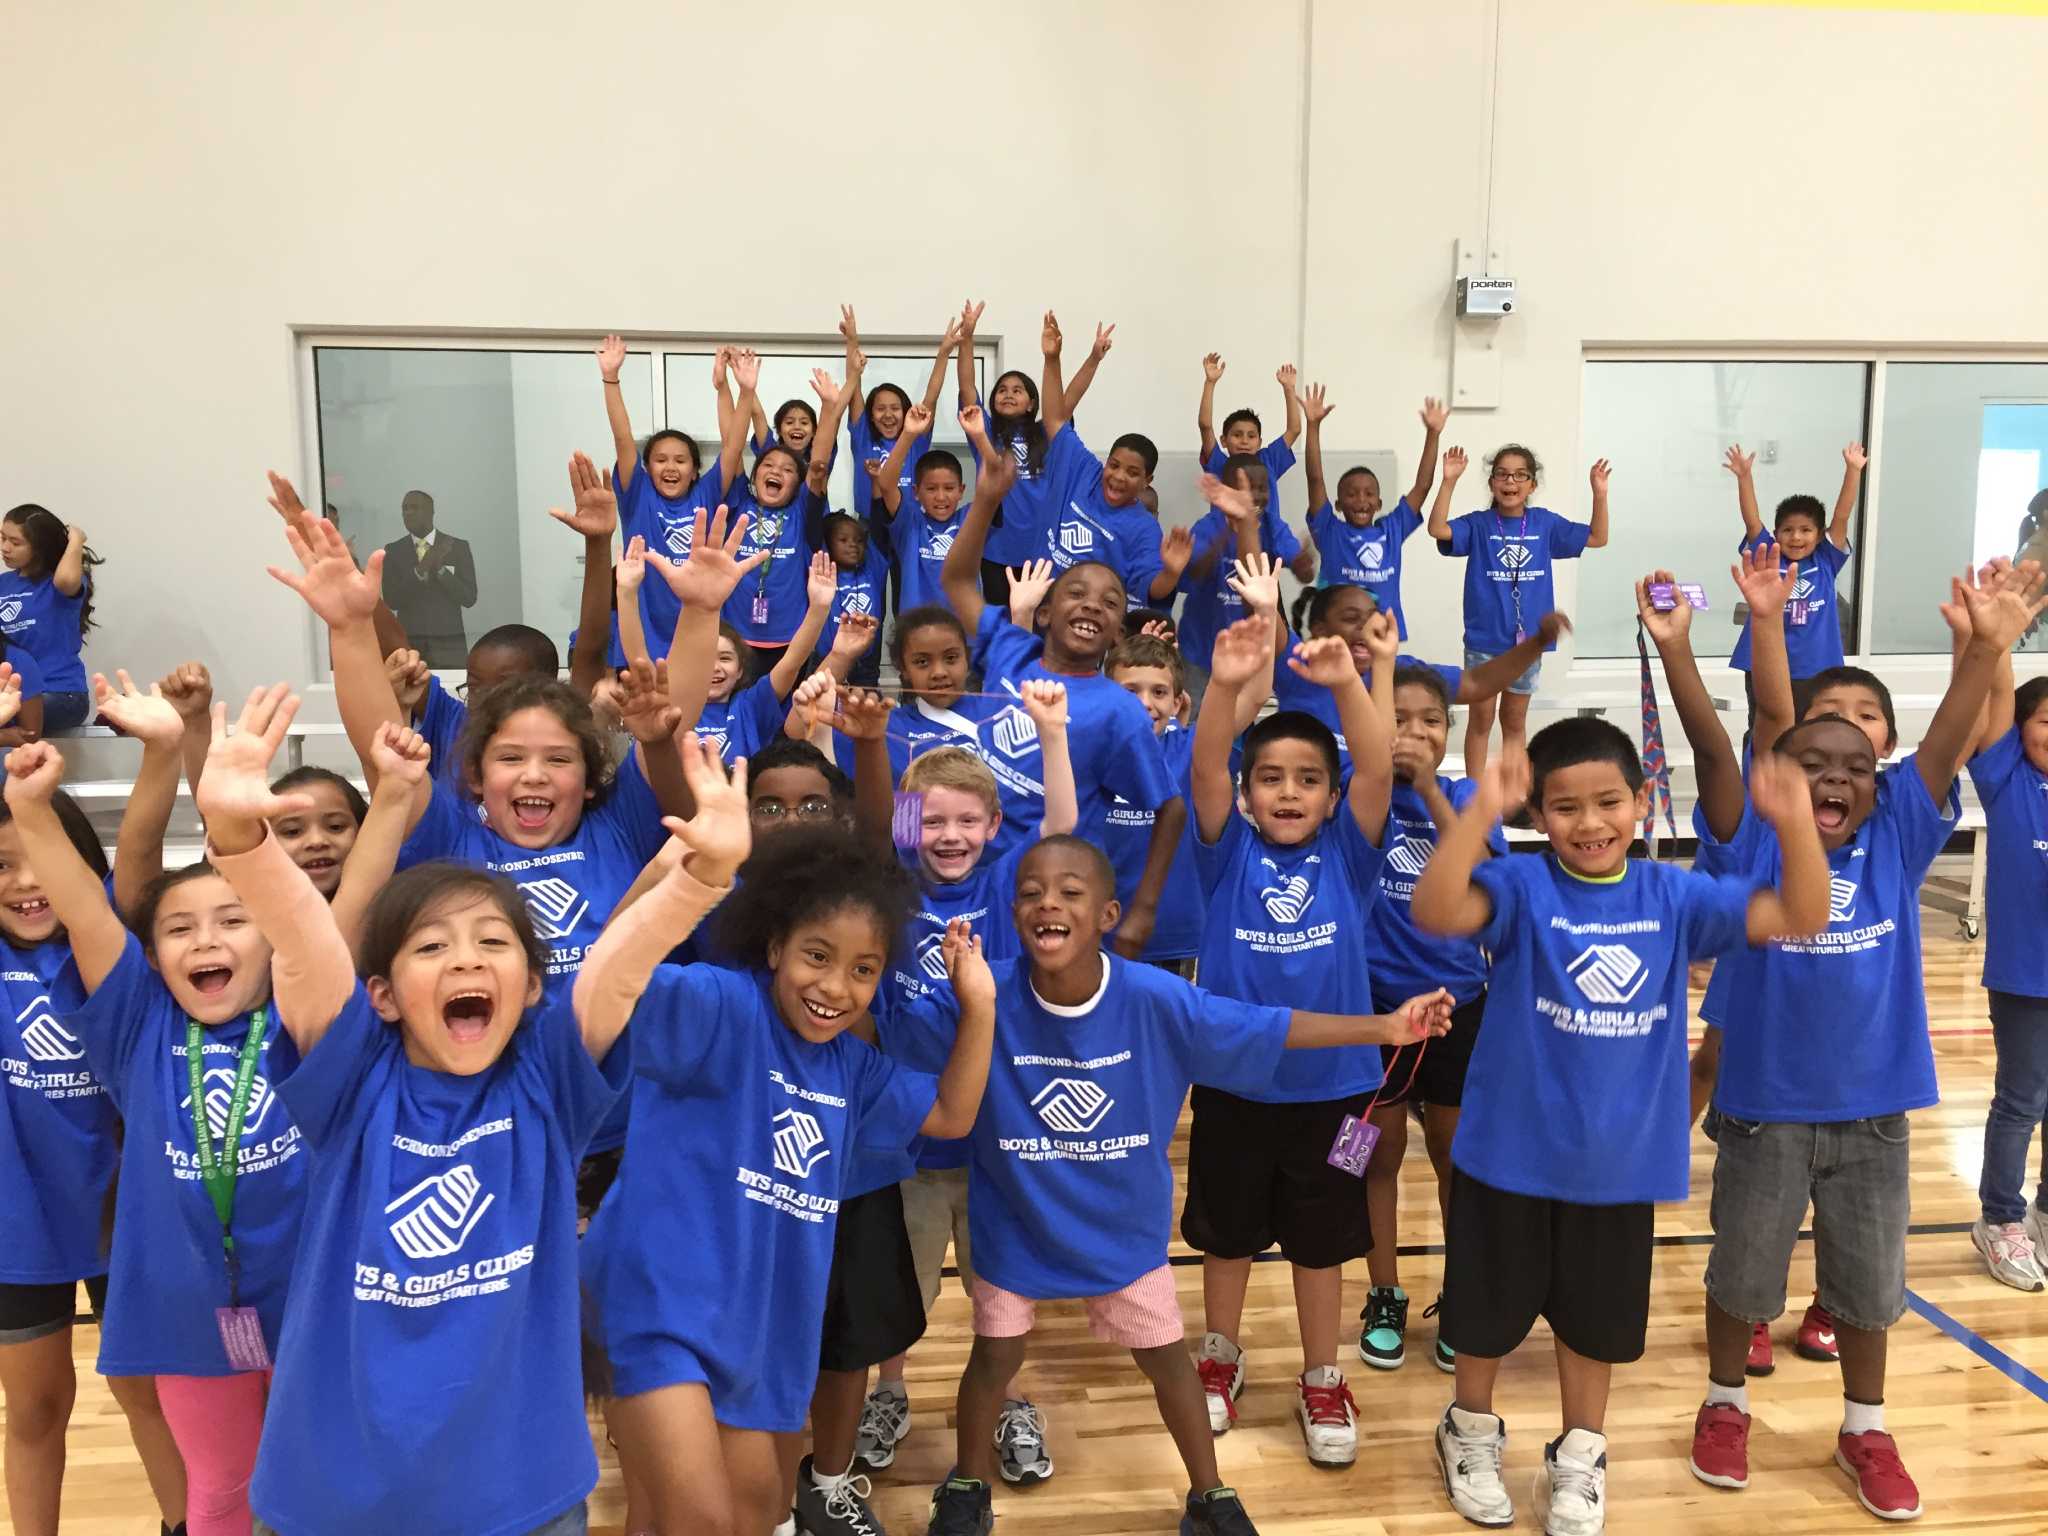 New facility opened by Boys & Girls Clubs for Richmond, Rosenberg